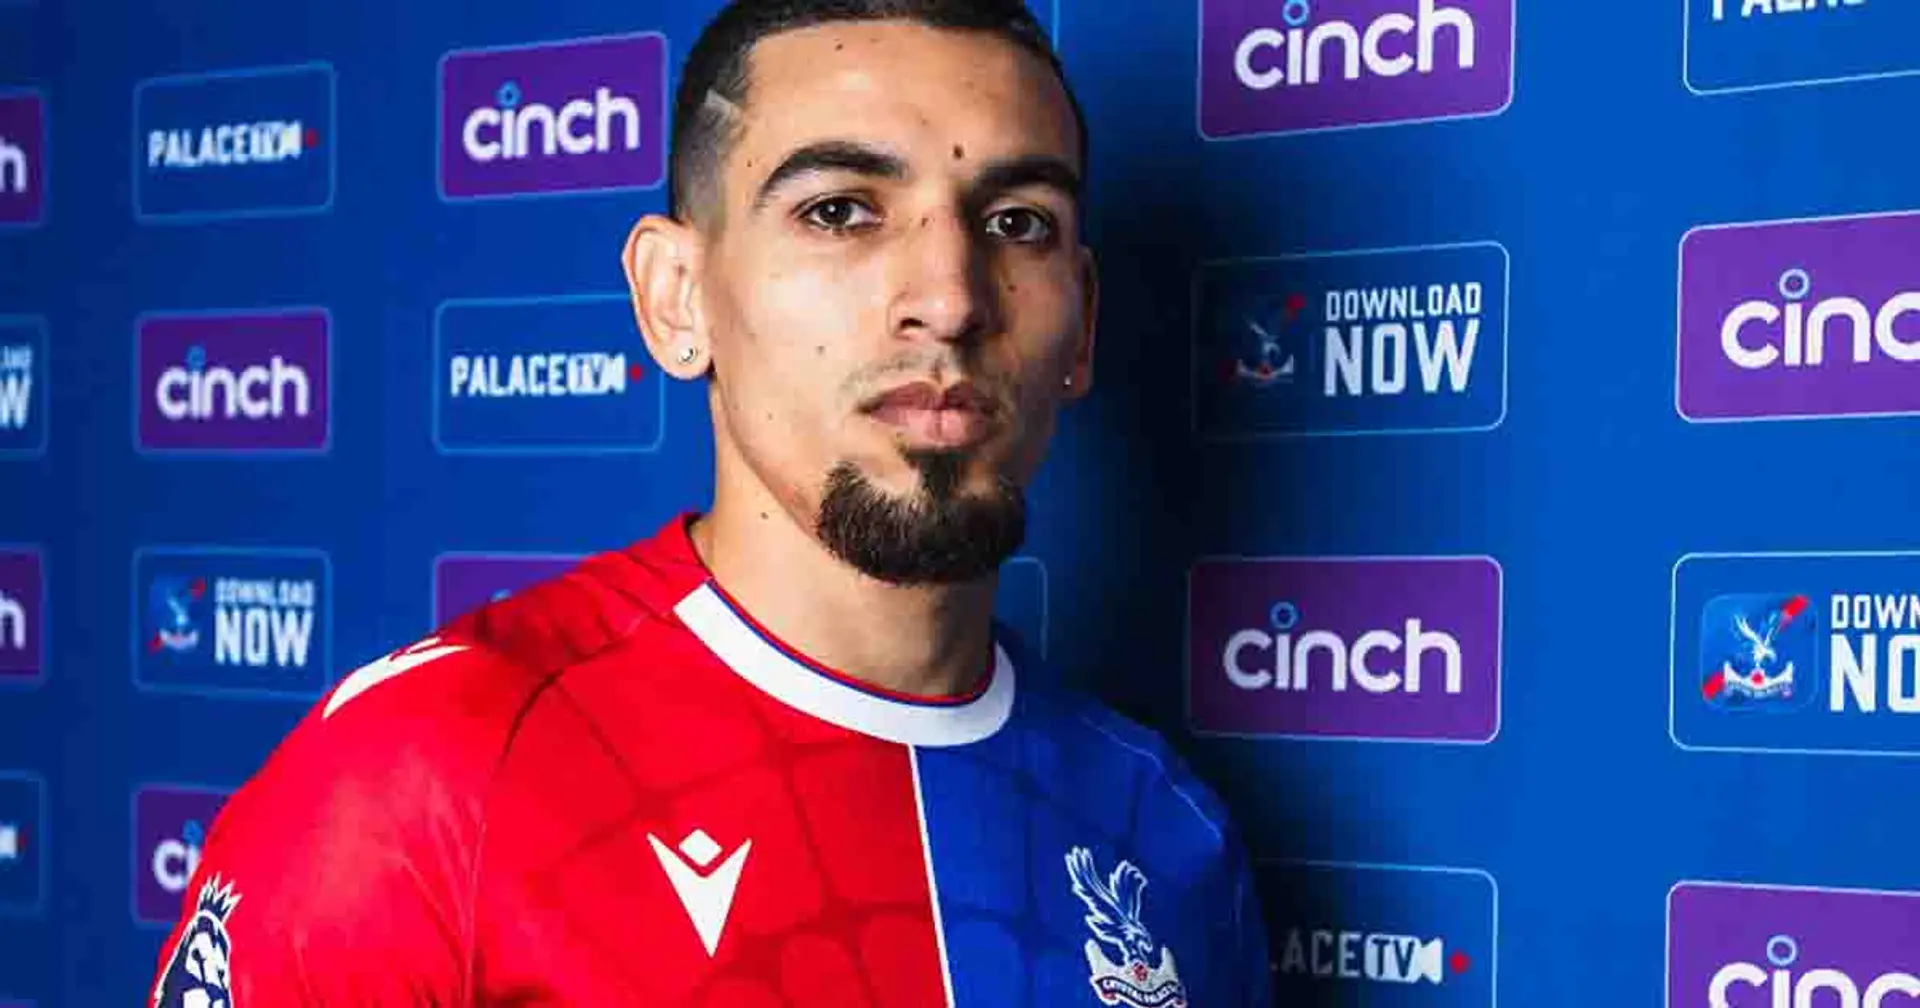 Crystal Palace confirm Daniel Munoz signing from Genk